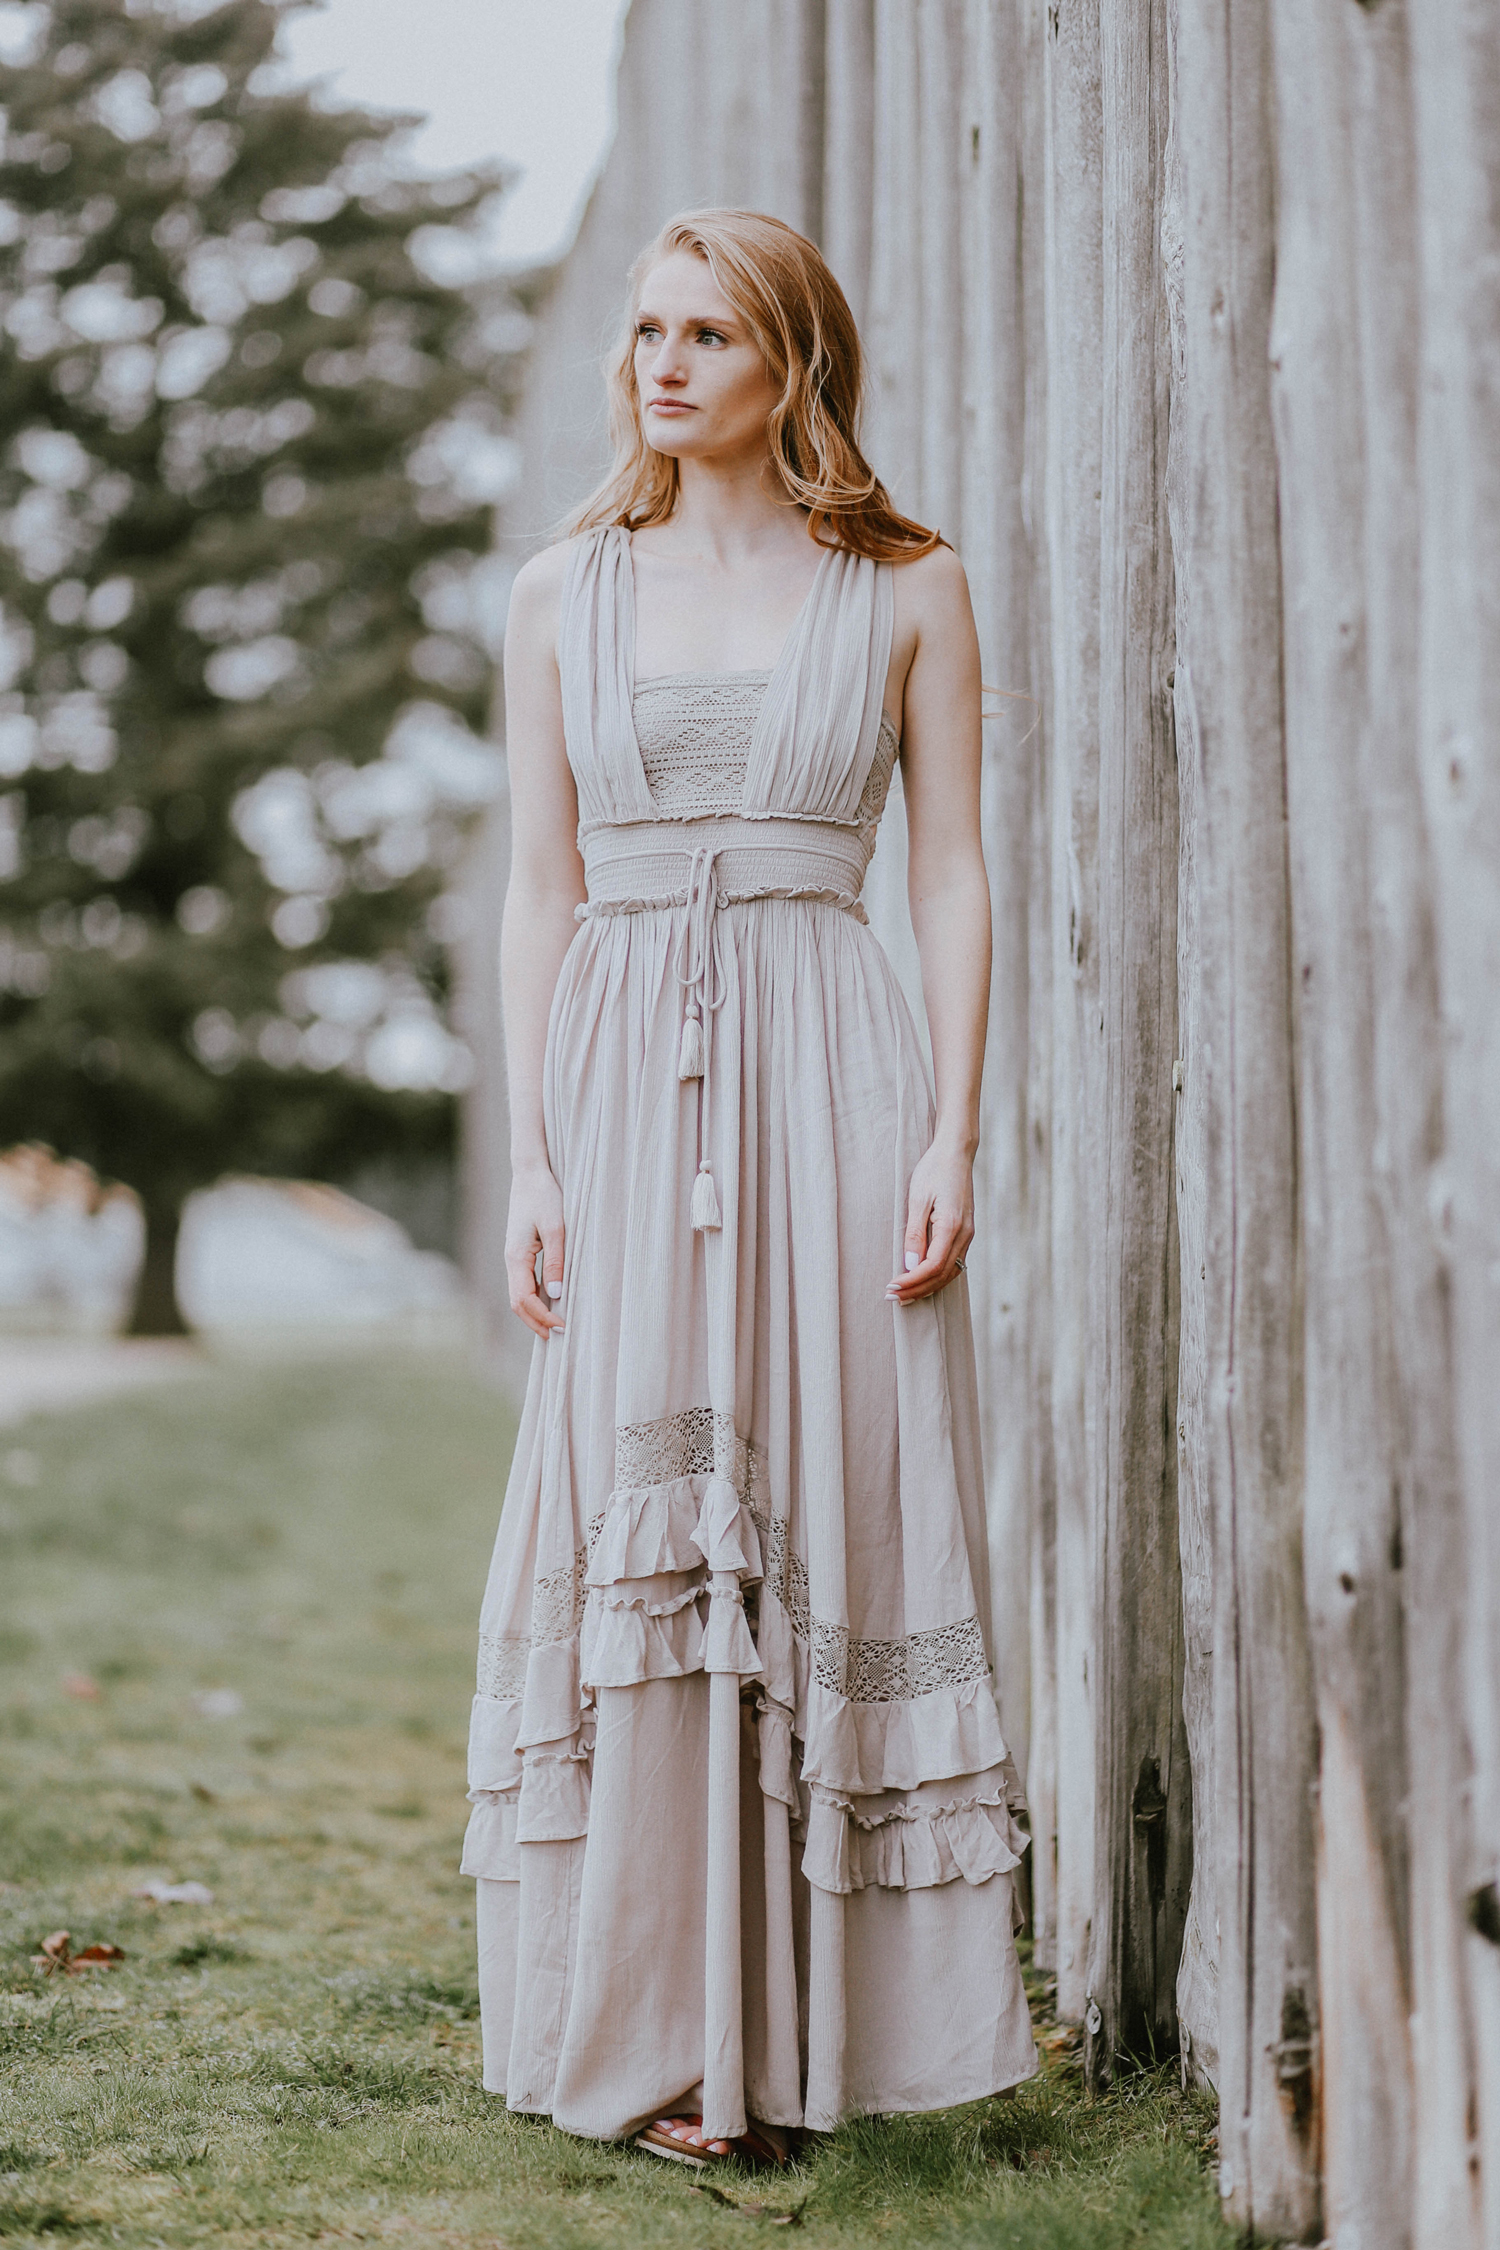 Boho Maxi Dress For Spring Free People Fort Vancouver National Historic Site Washington